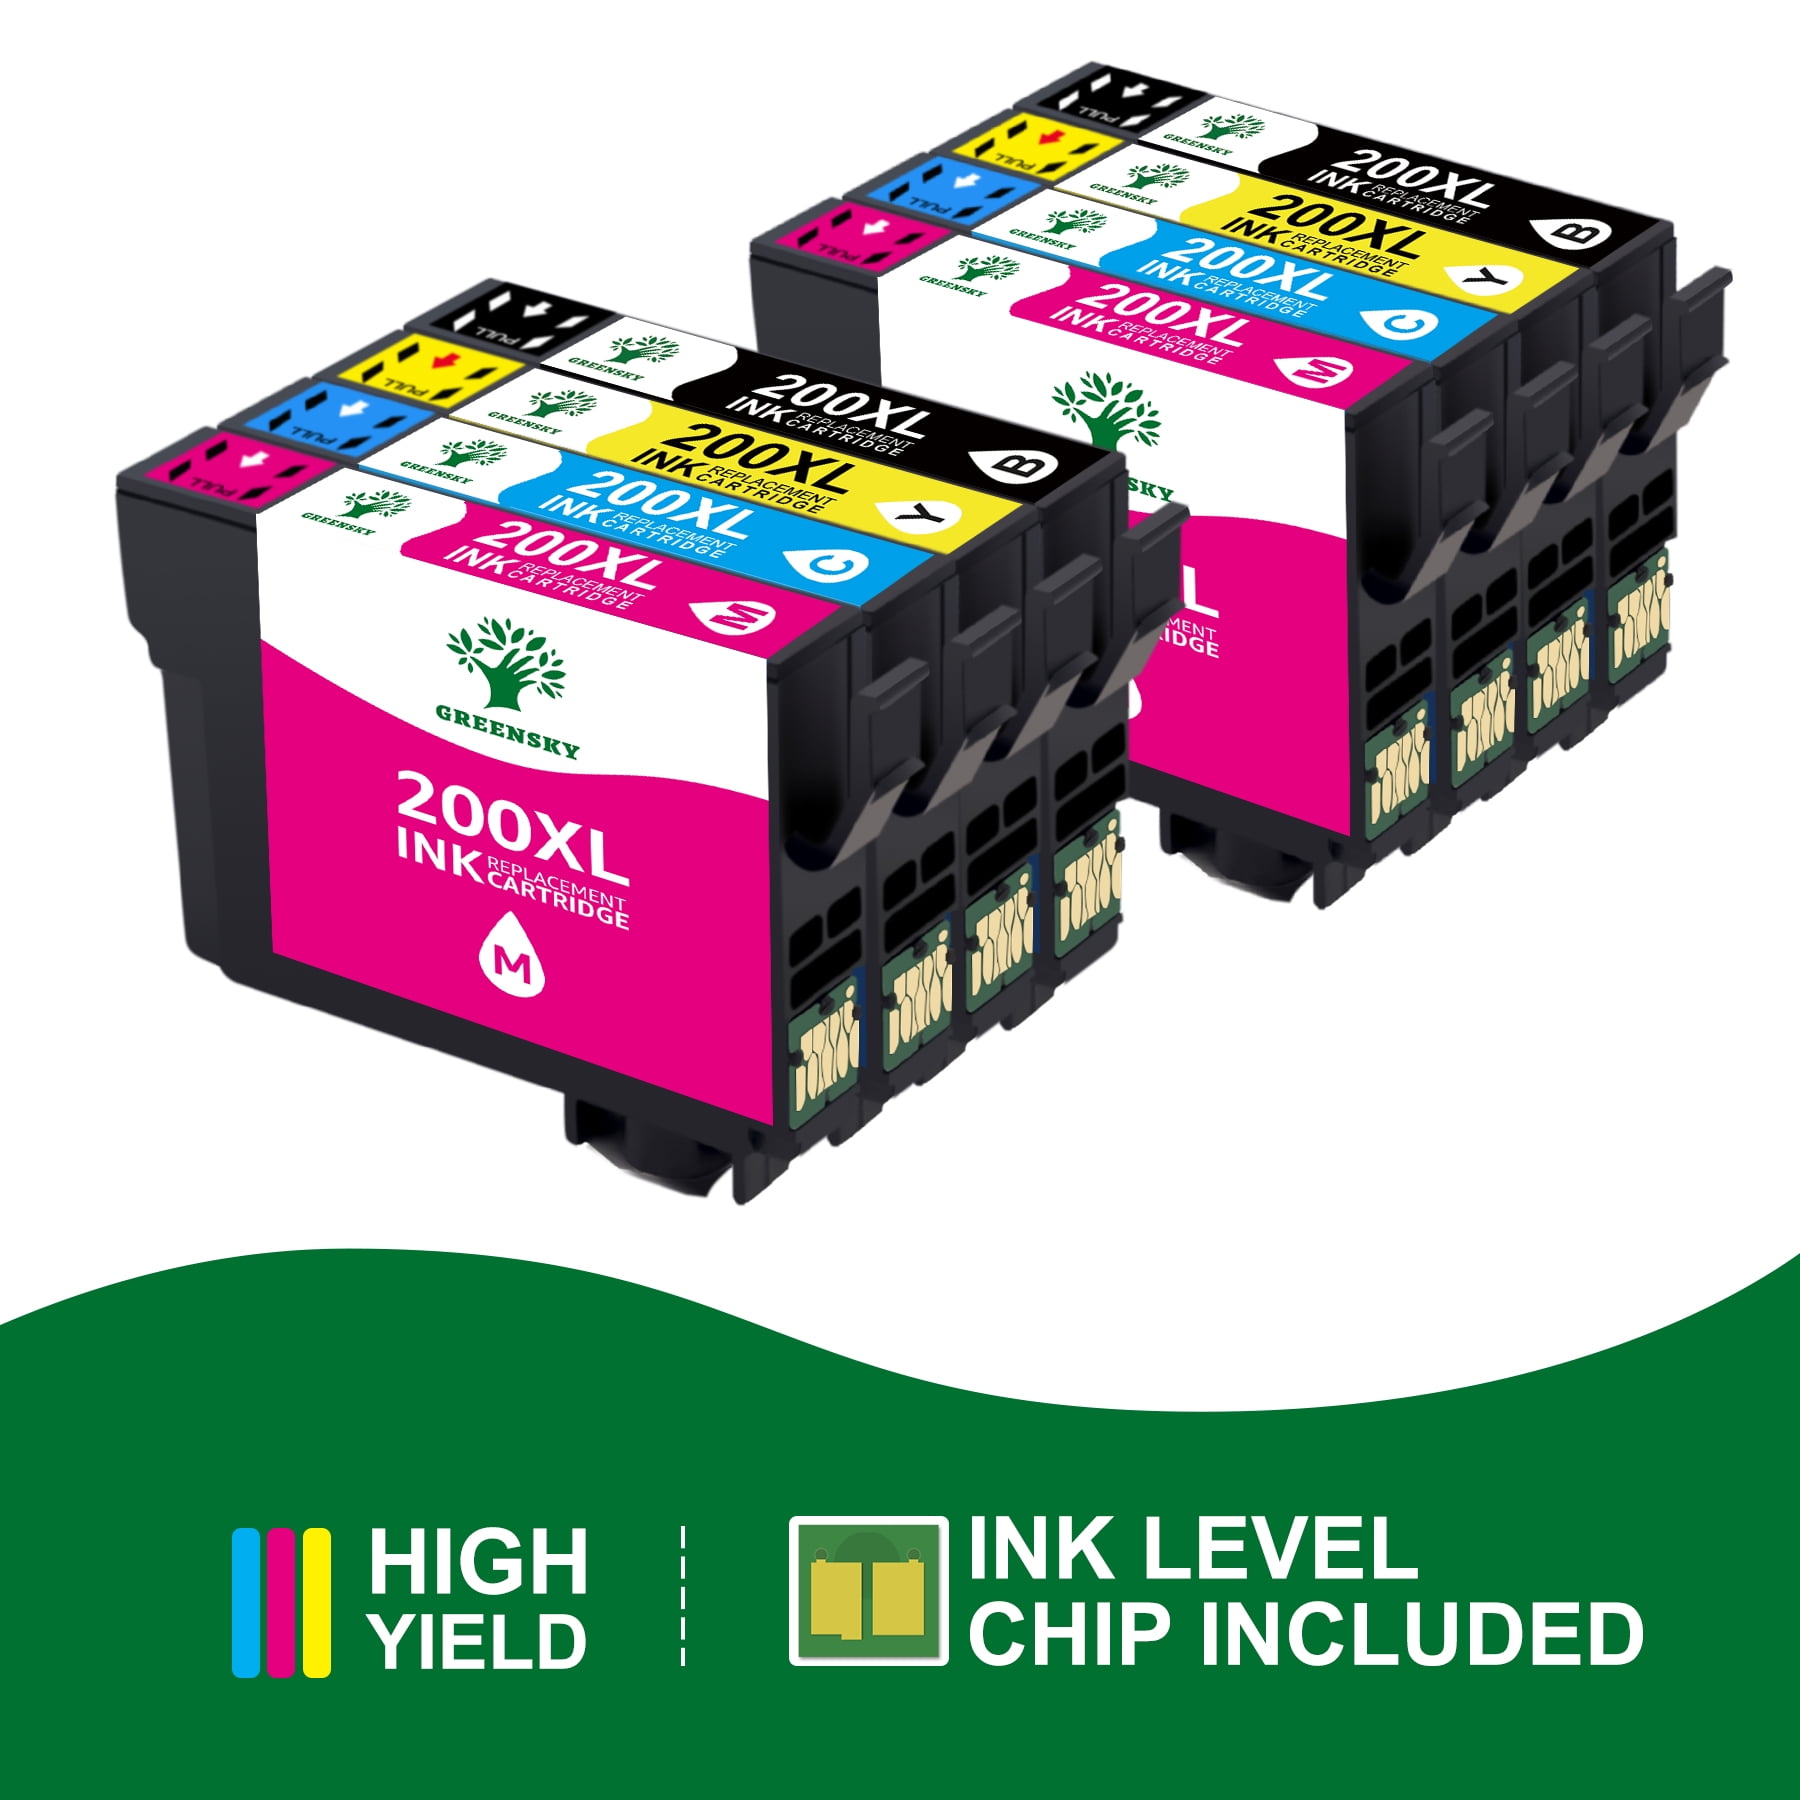 Greensky 200xl Ink Cartridge Replacement For Epson 200xl 200 200 Xl T200 Combo Pack For Xp 410 7797